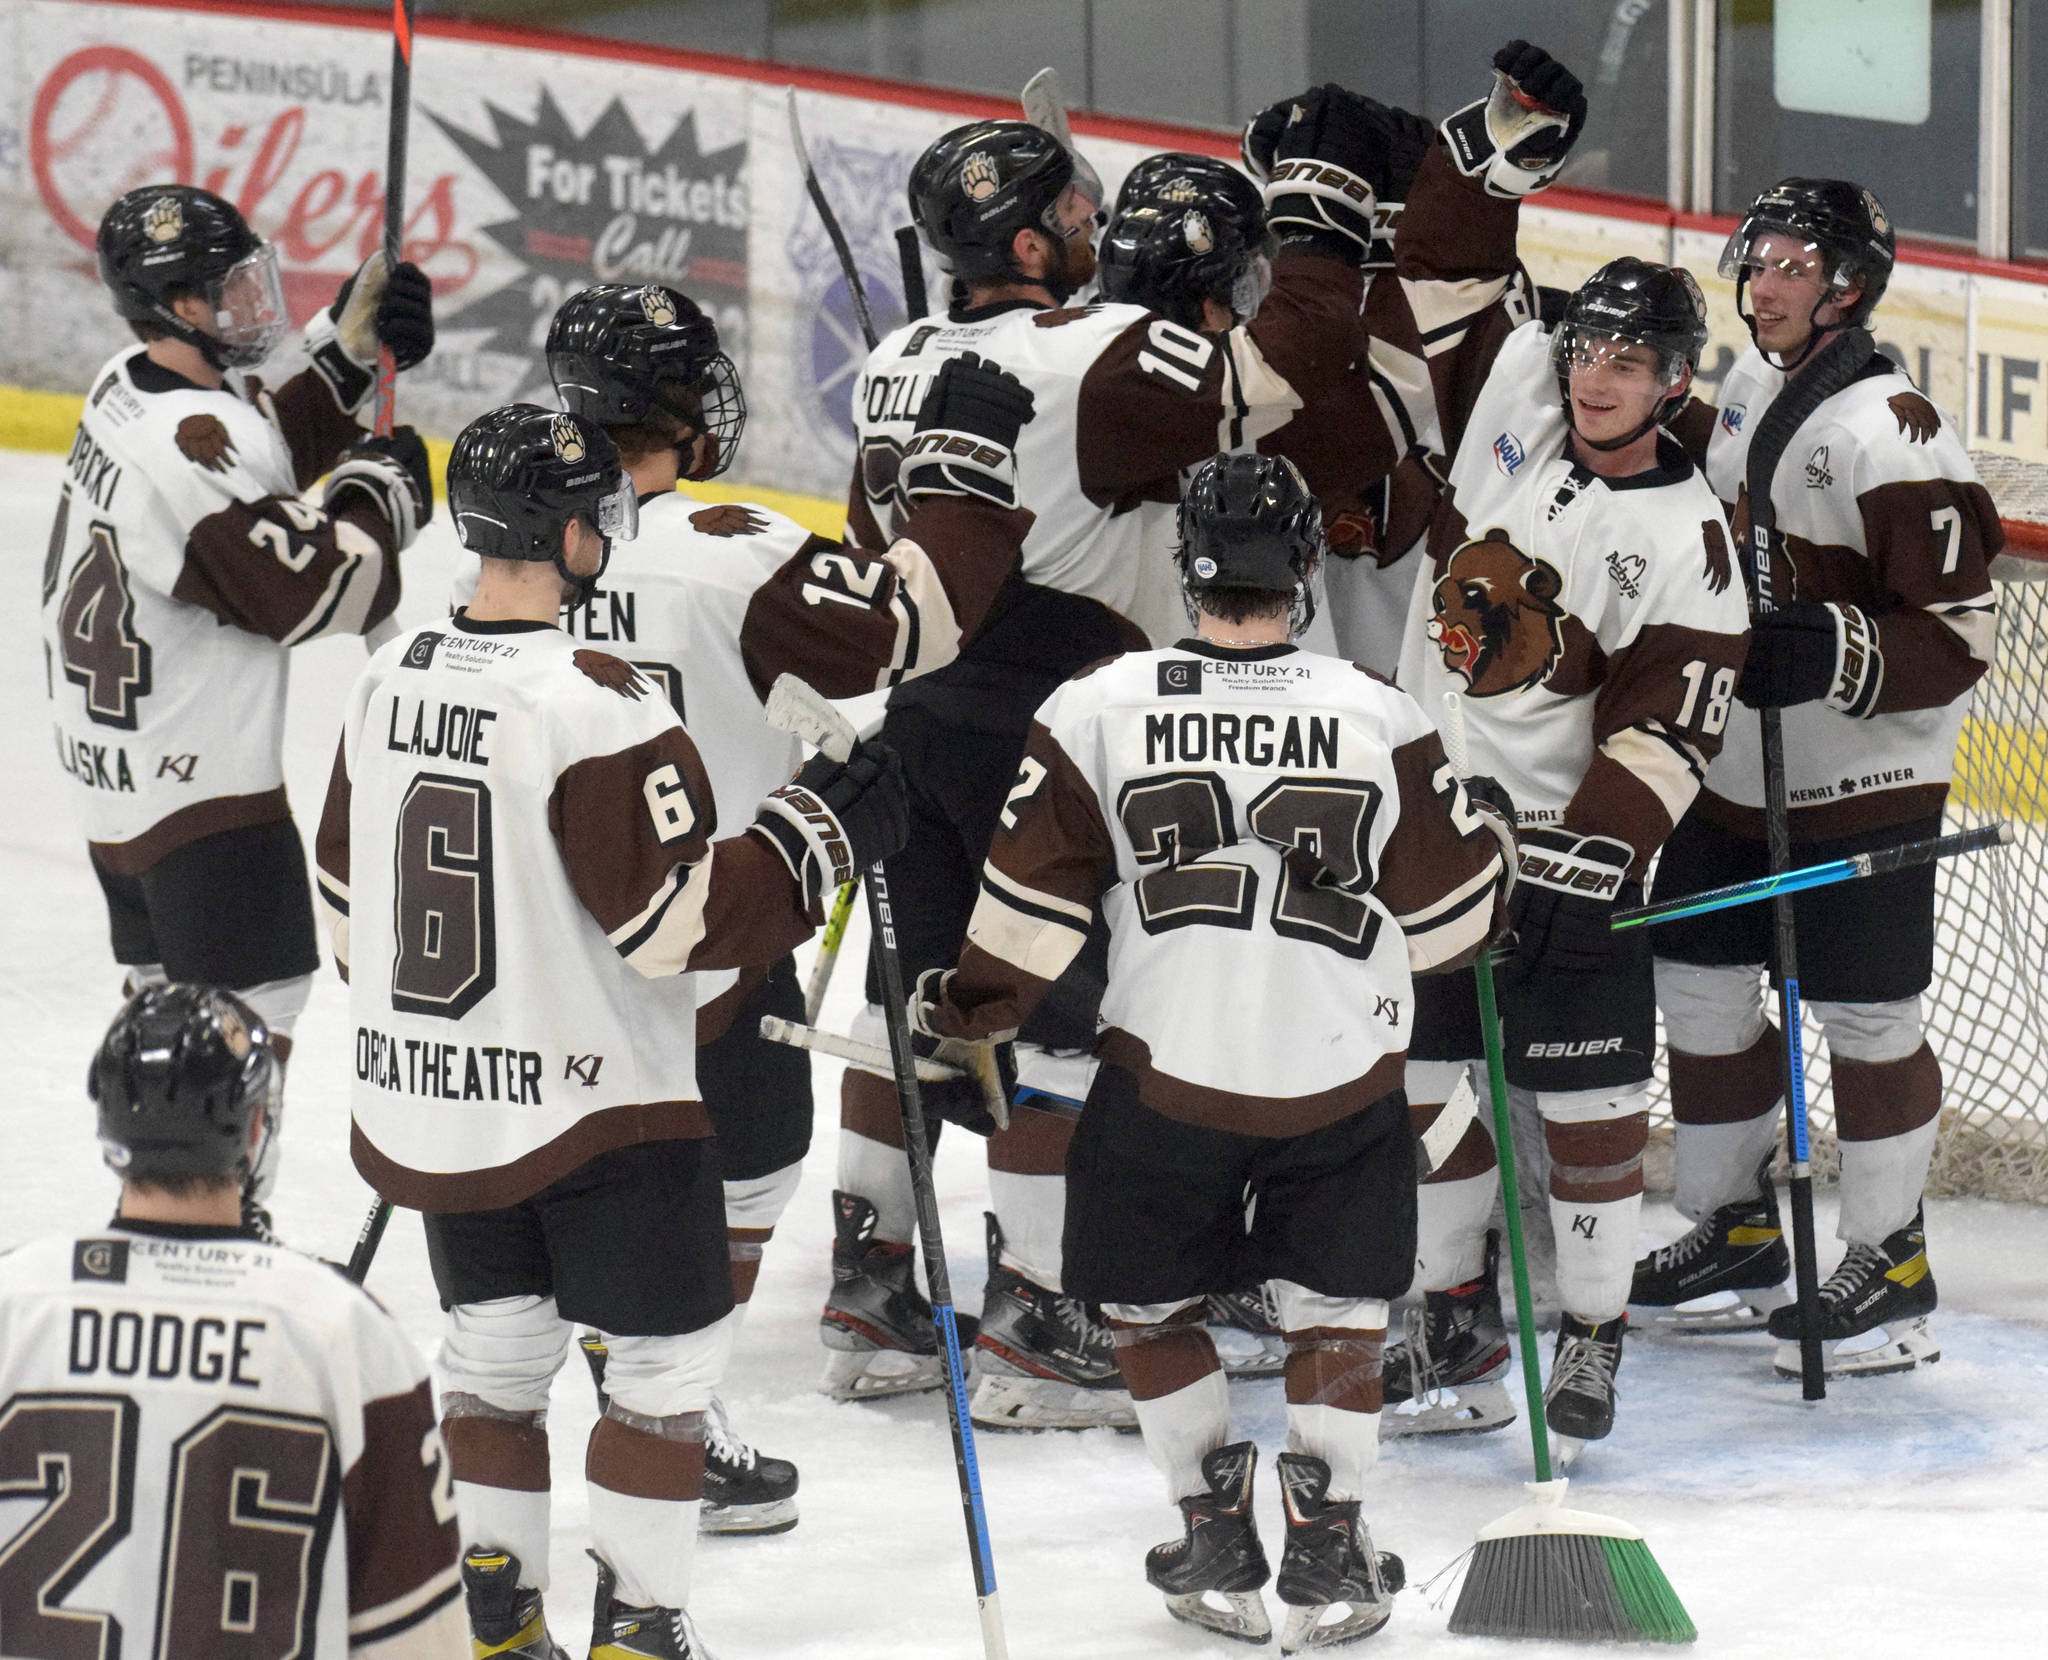 The Kenai River Brown Bears celebrate a three-game sweep of the Chippewa (Wisconsin) Steel on Sunday, April 25, 2021, at the Soldotna Regional Sports Complex in Soldotna, Alaska. (Photo by Jeff Helminiak/Peninsula Clarion)